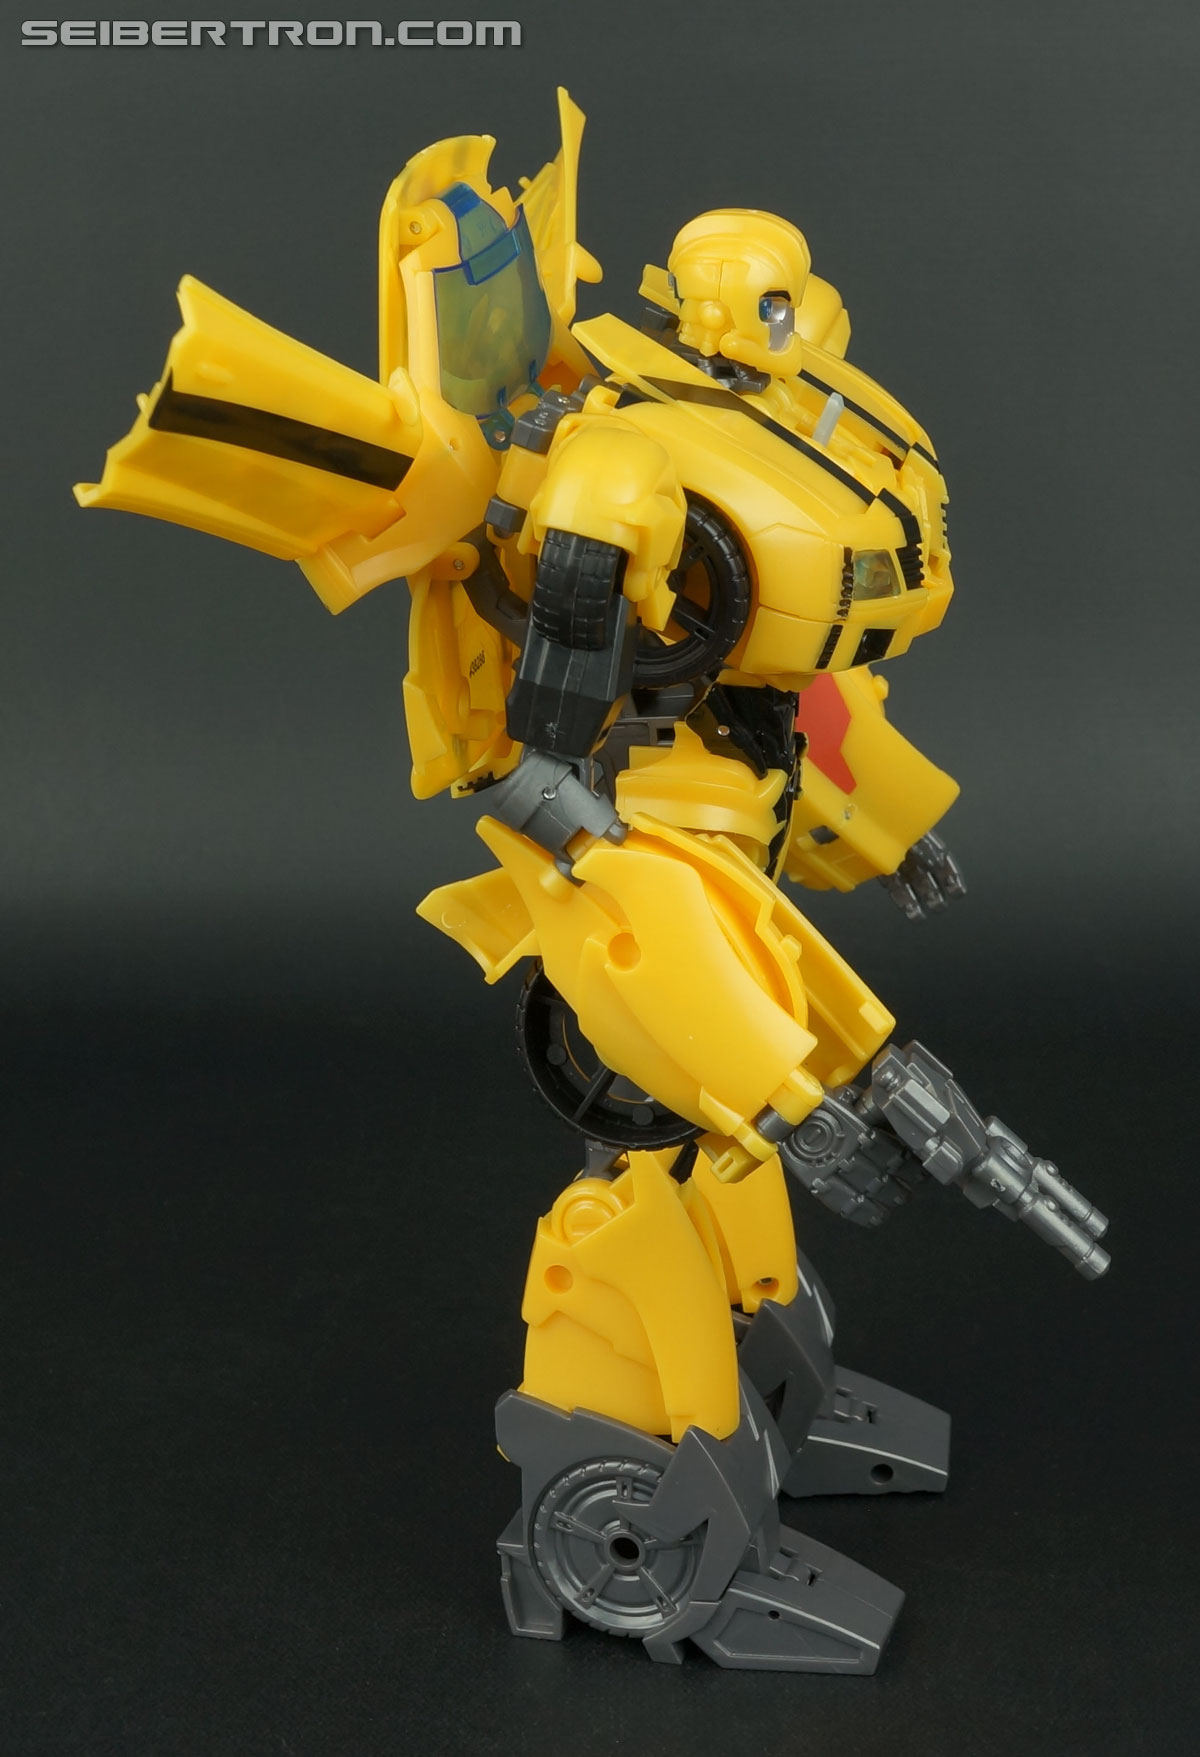 Transformers Prime: Robots In Disguise Bumblebee (Image #64 of 114)